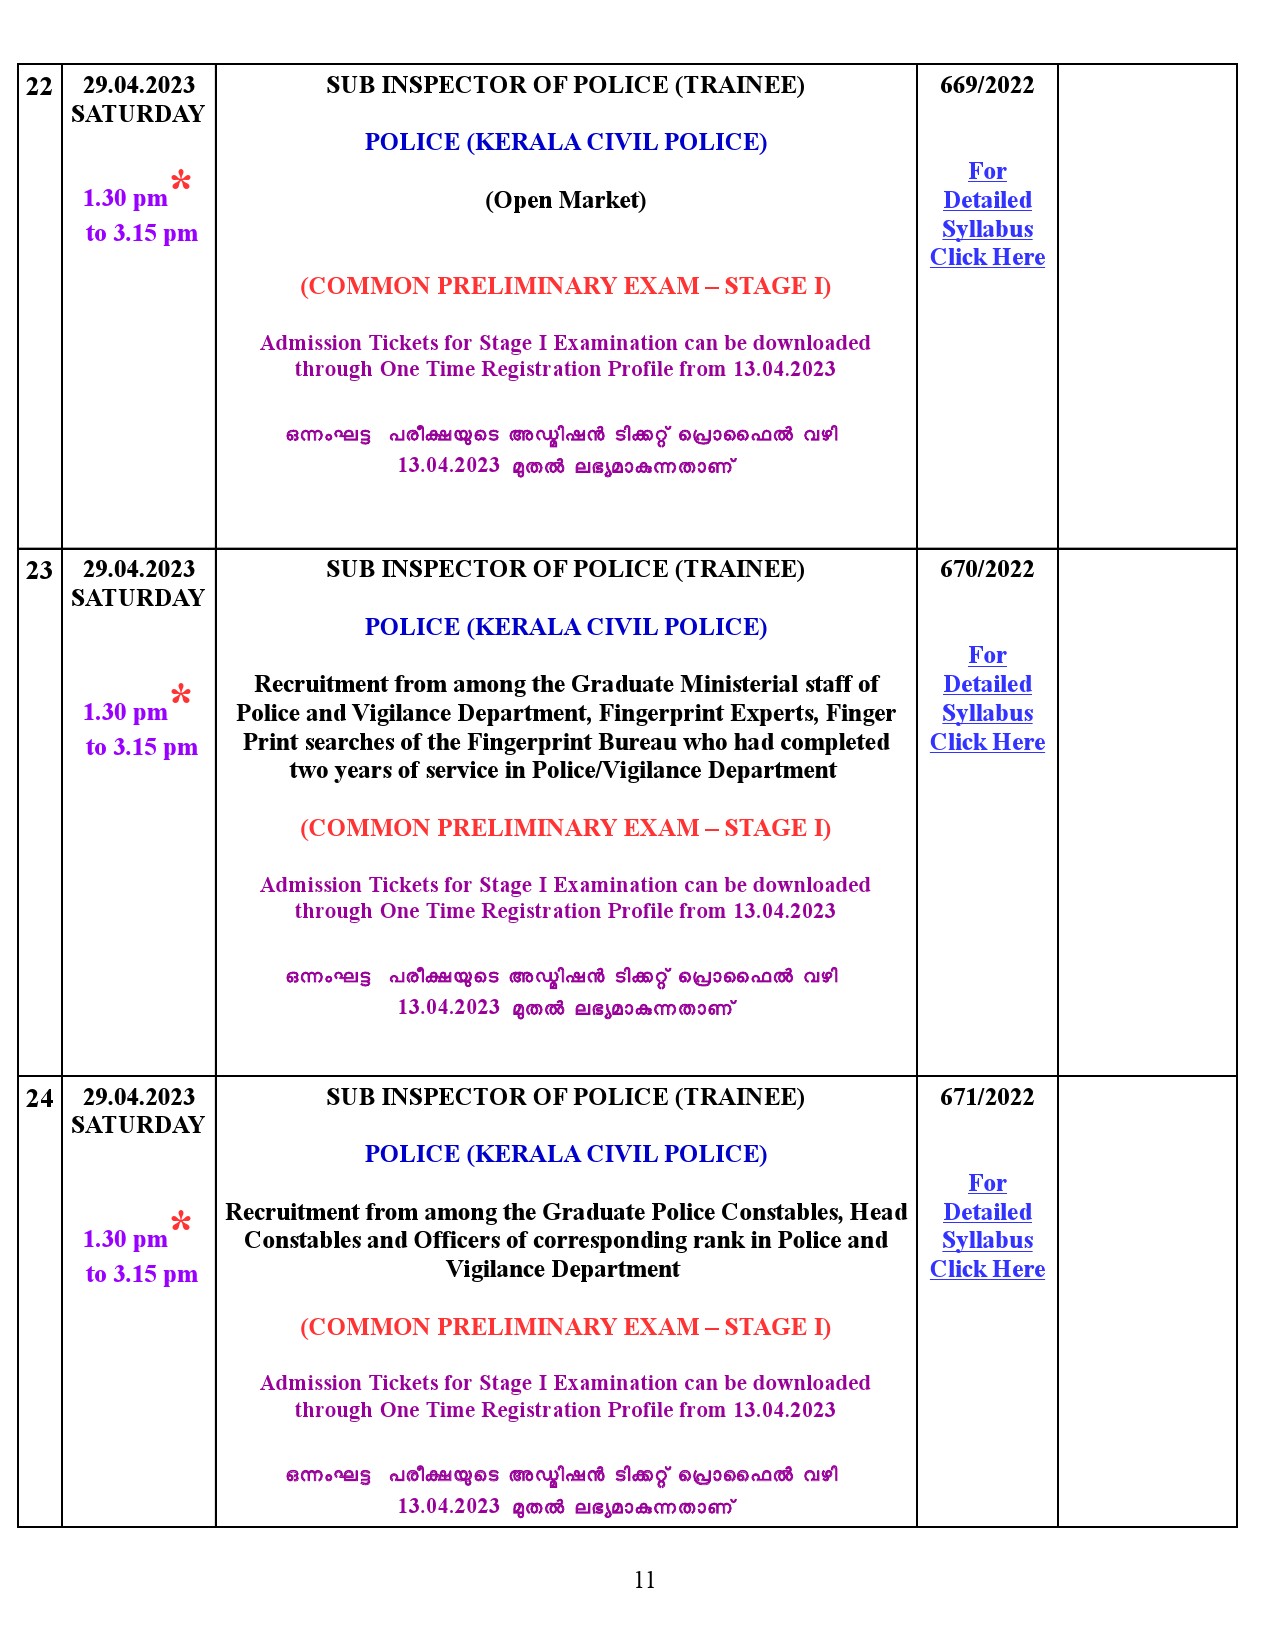 Examination Programme For The Month Of April 2023 - Notification Image 11